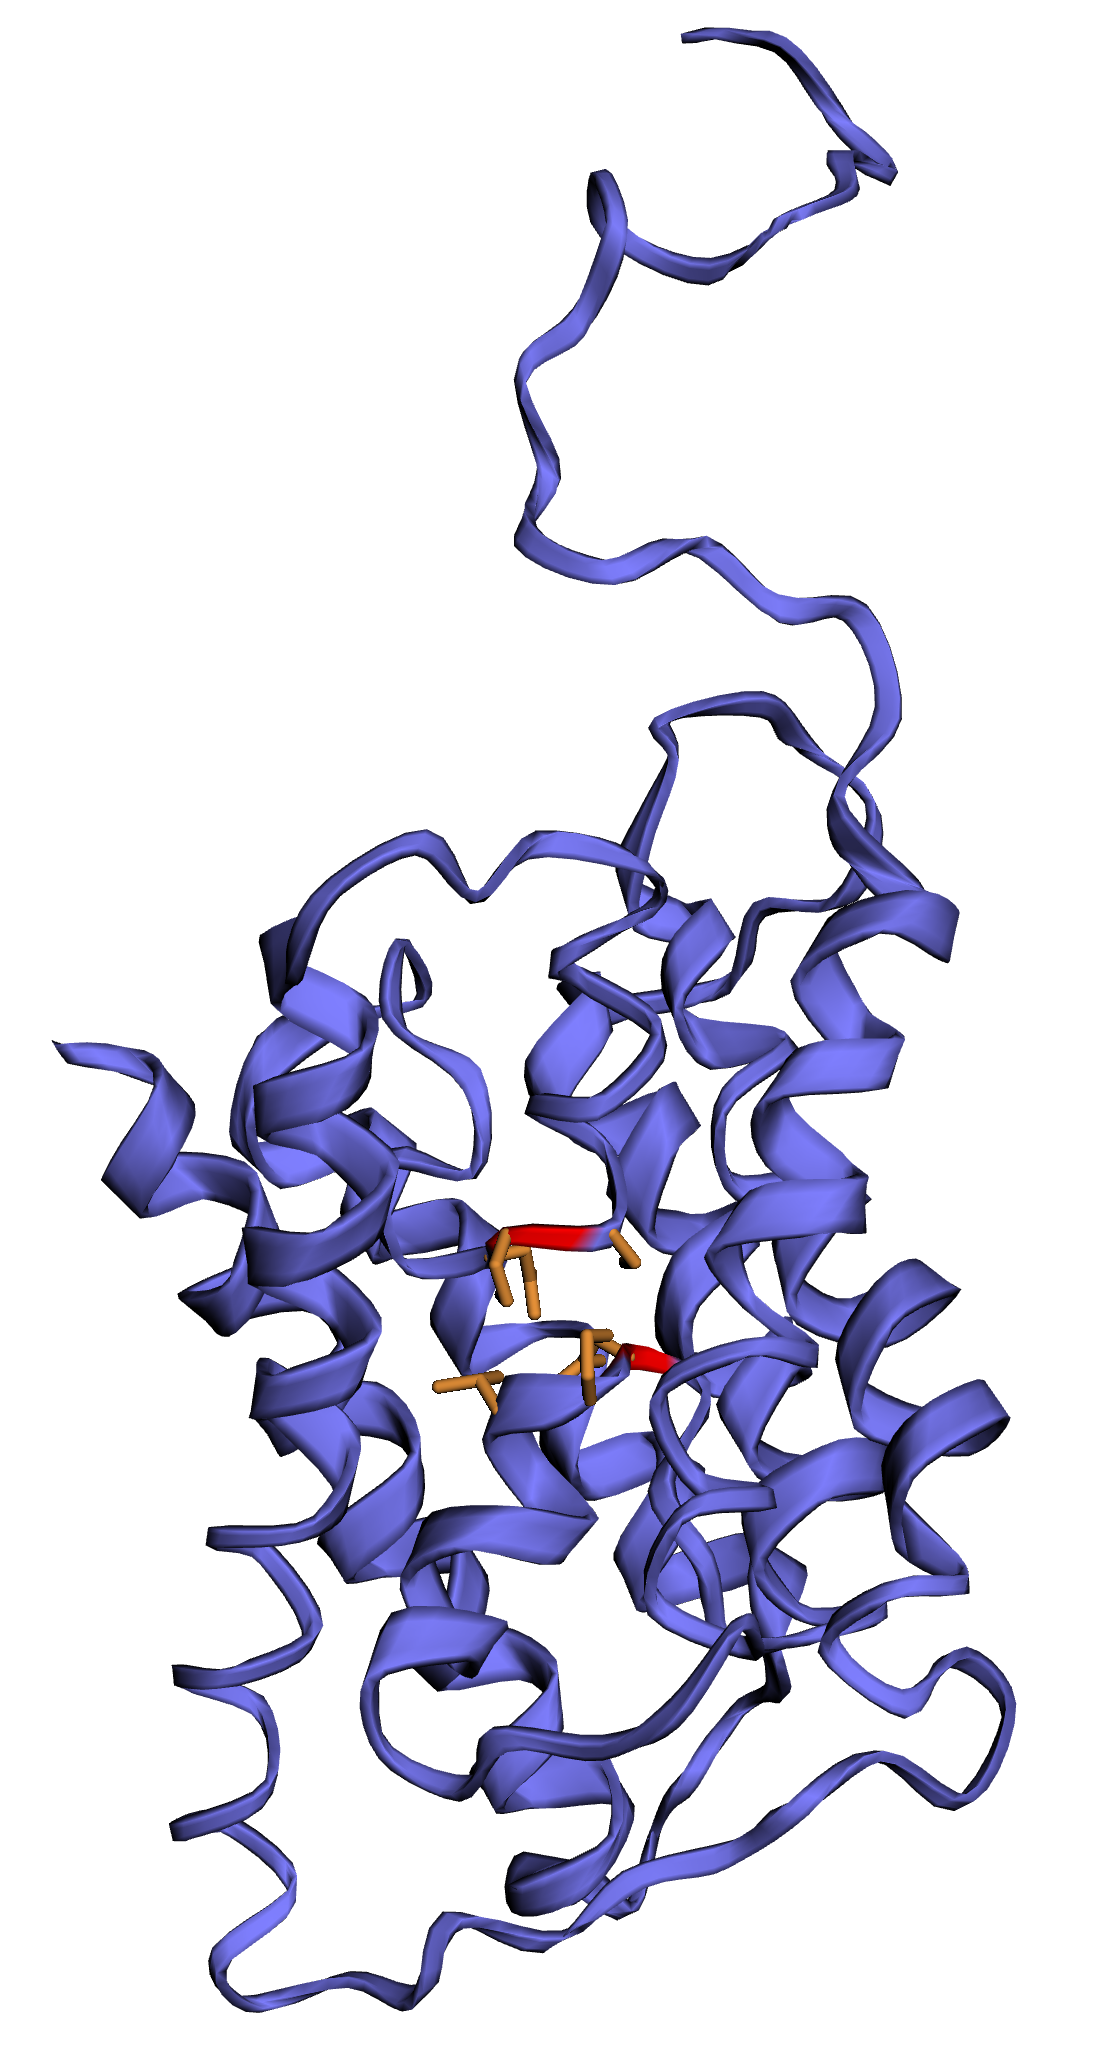 Example of a 3D model of an Aquaporin protein recovered in the sagebrush genome. NPA motifs are shown by red/orange colors